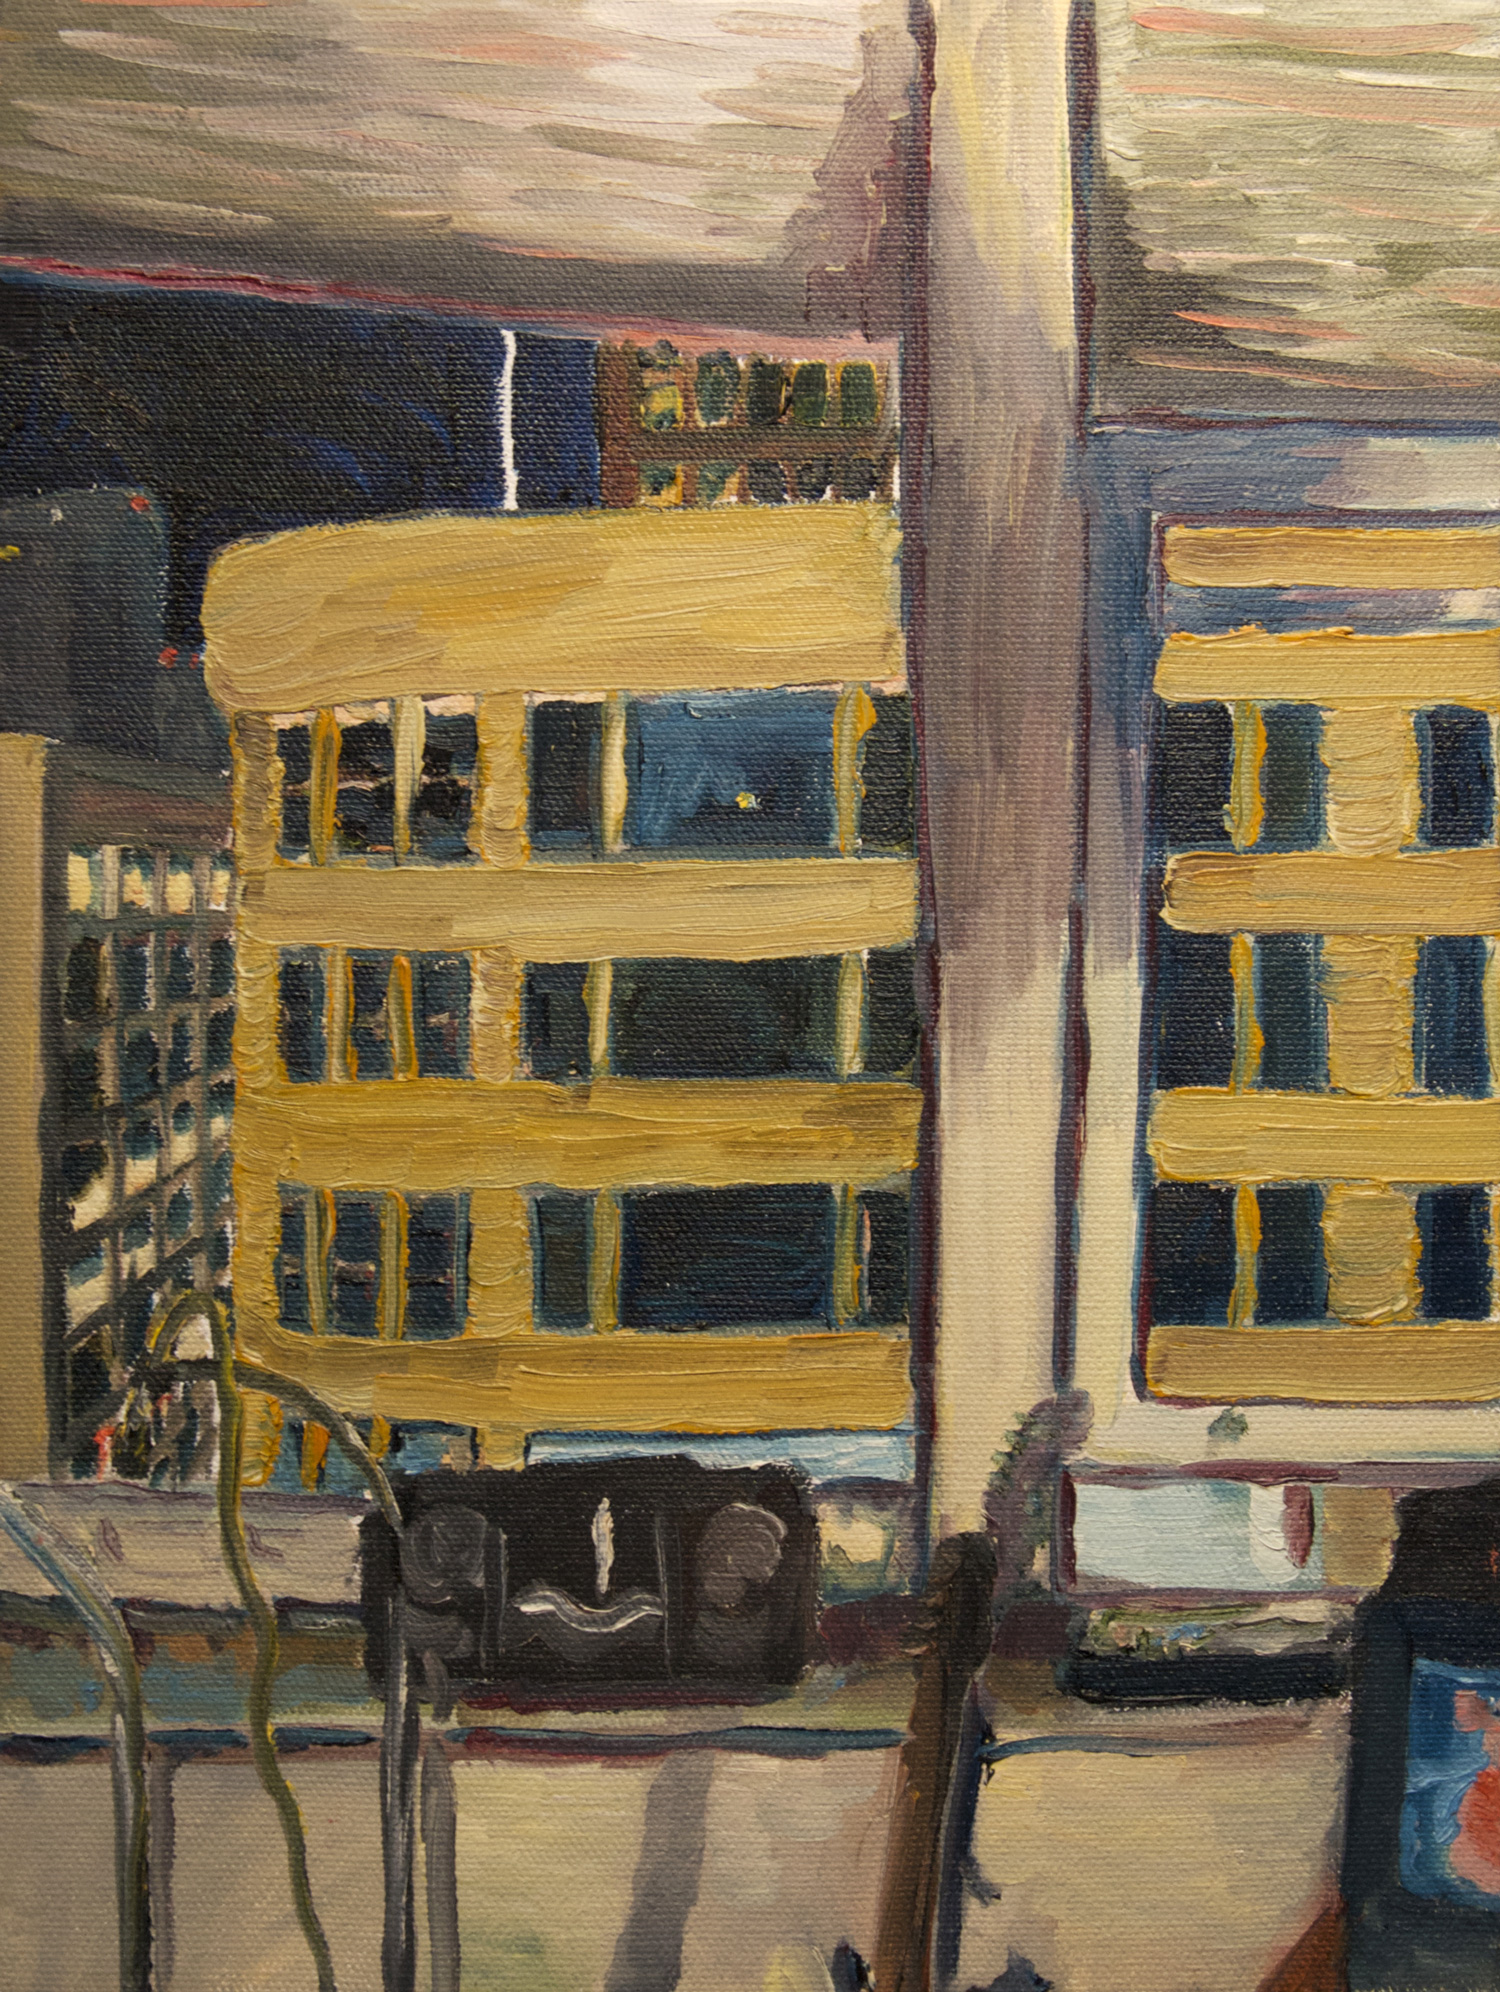 13th Floor, 7 West Madison oil painting (Chicago), by Billy Reiter